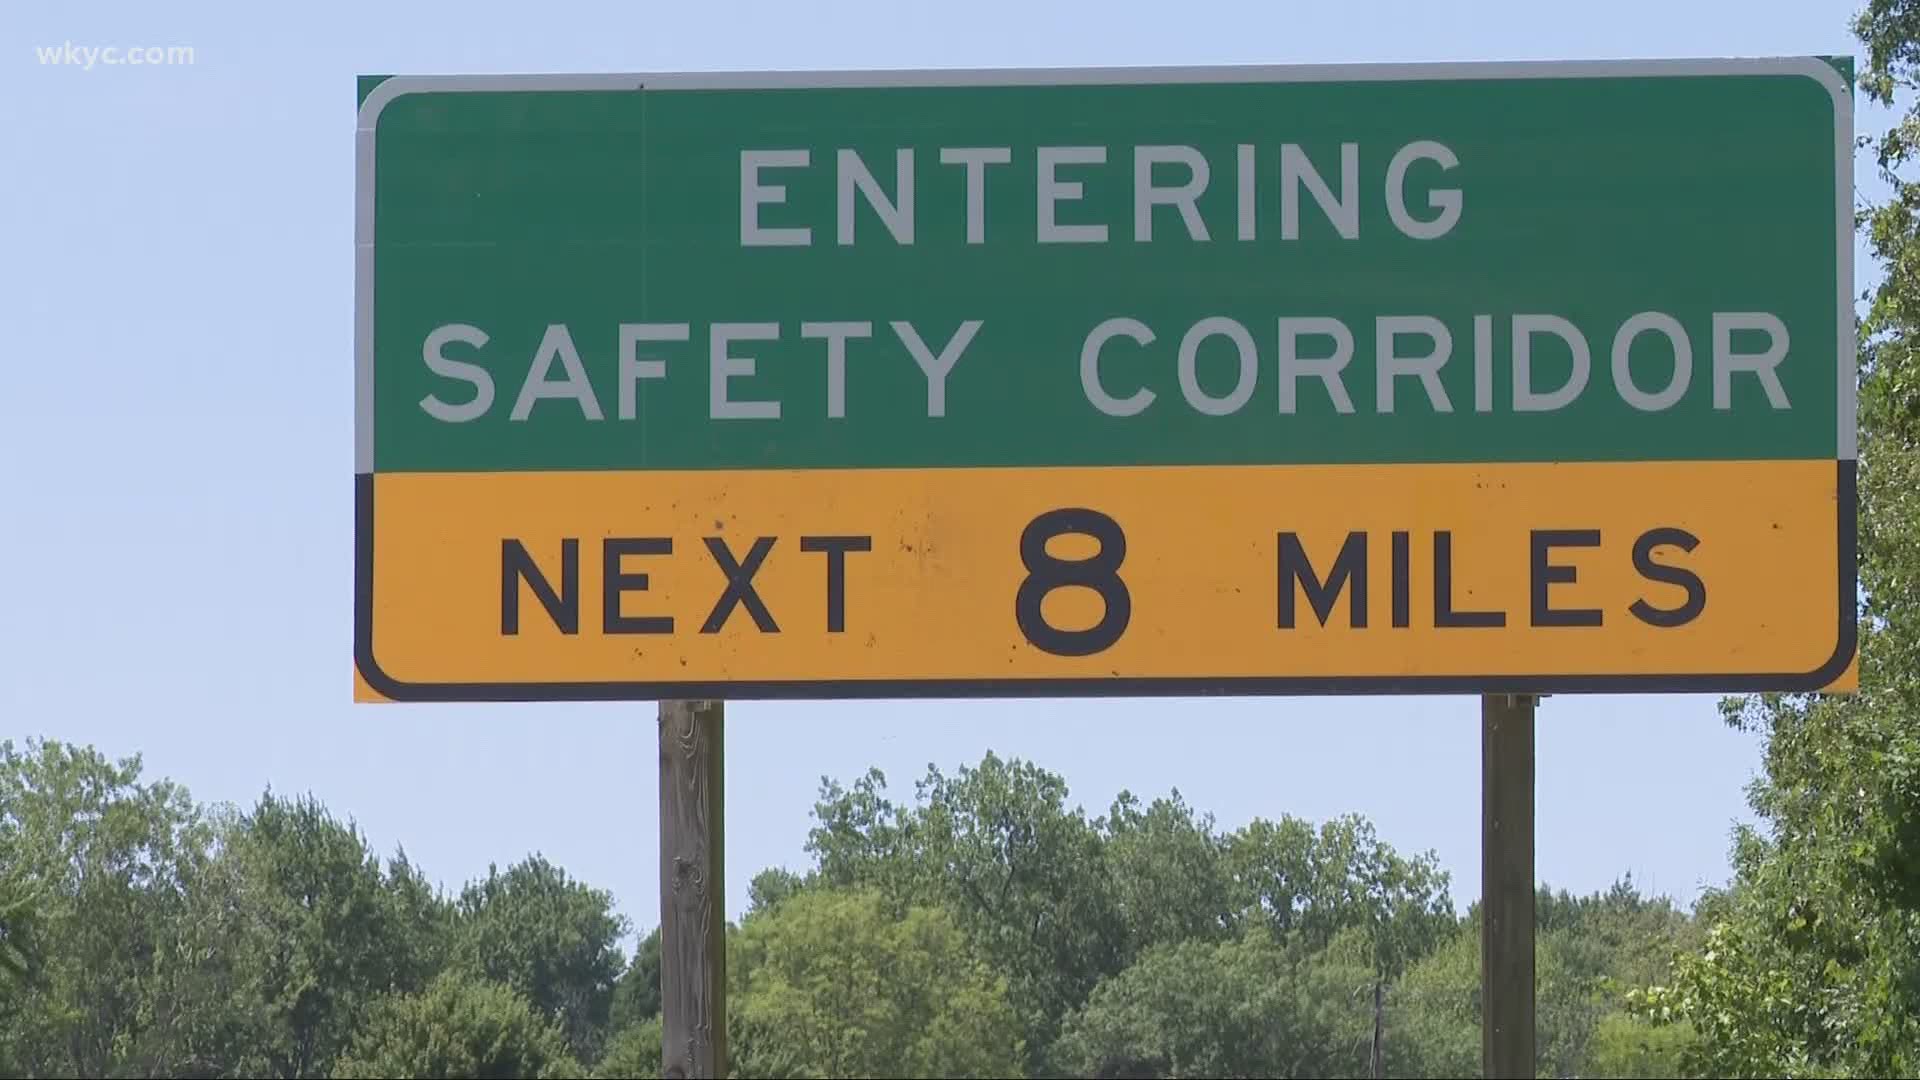 The partnership is between ODOT and the Ohio State Highway Patrol. The plan will initiate a new “traffic safety corridor" along a portion of state Route 2.